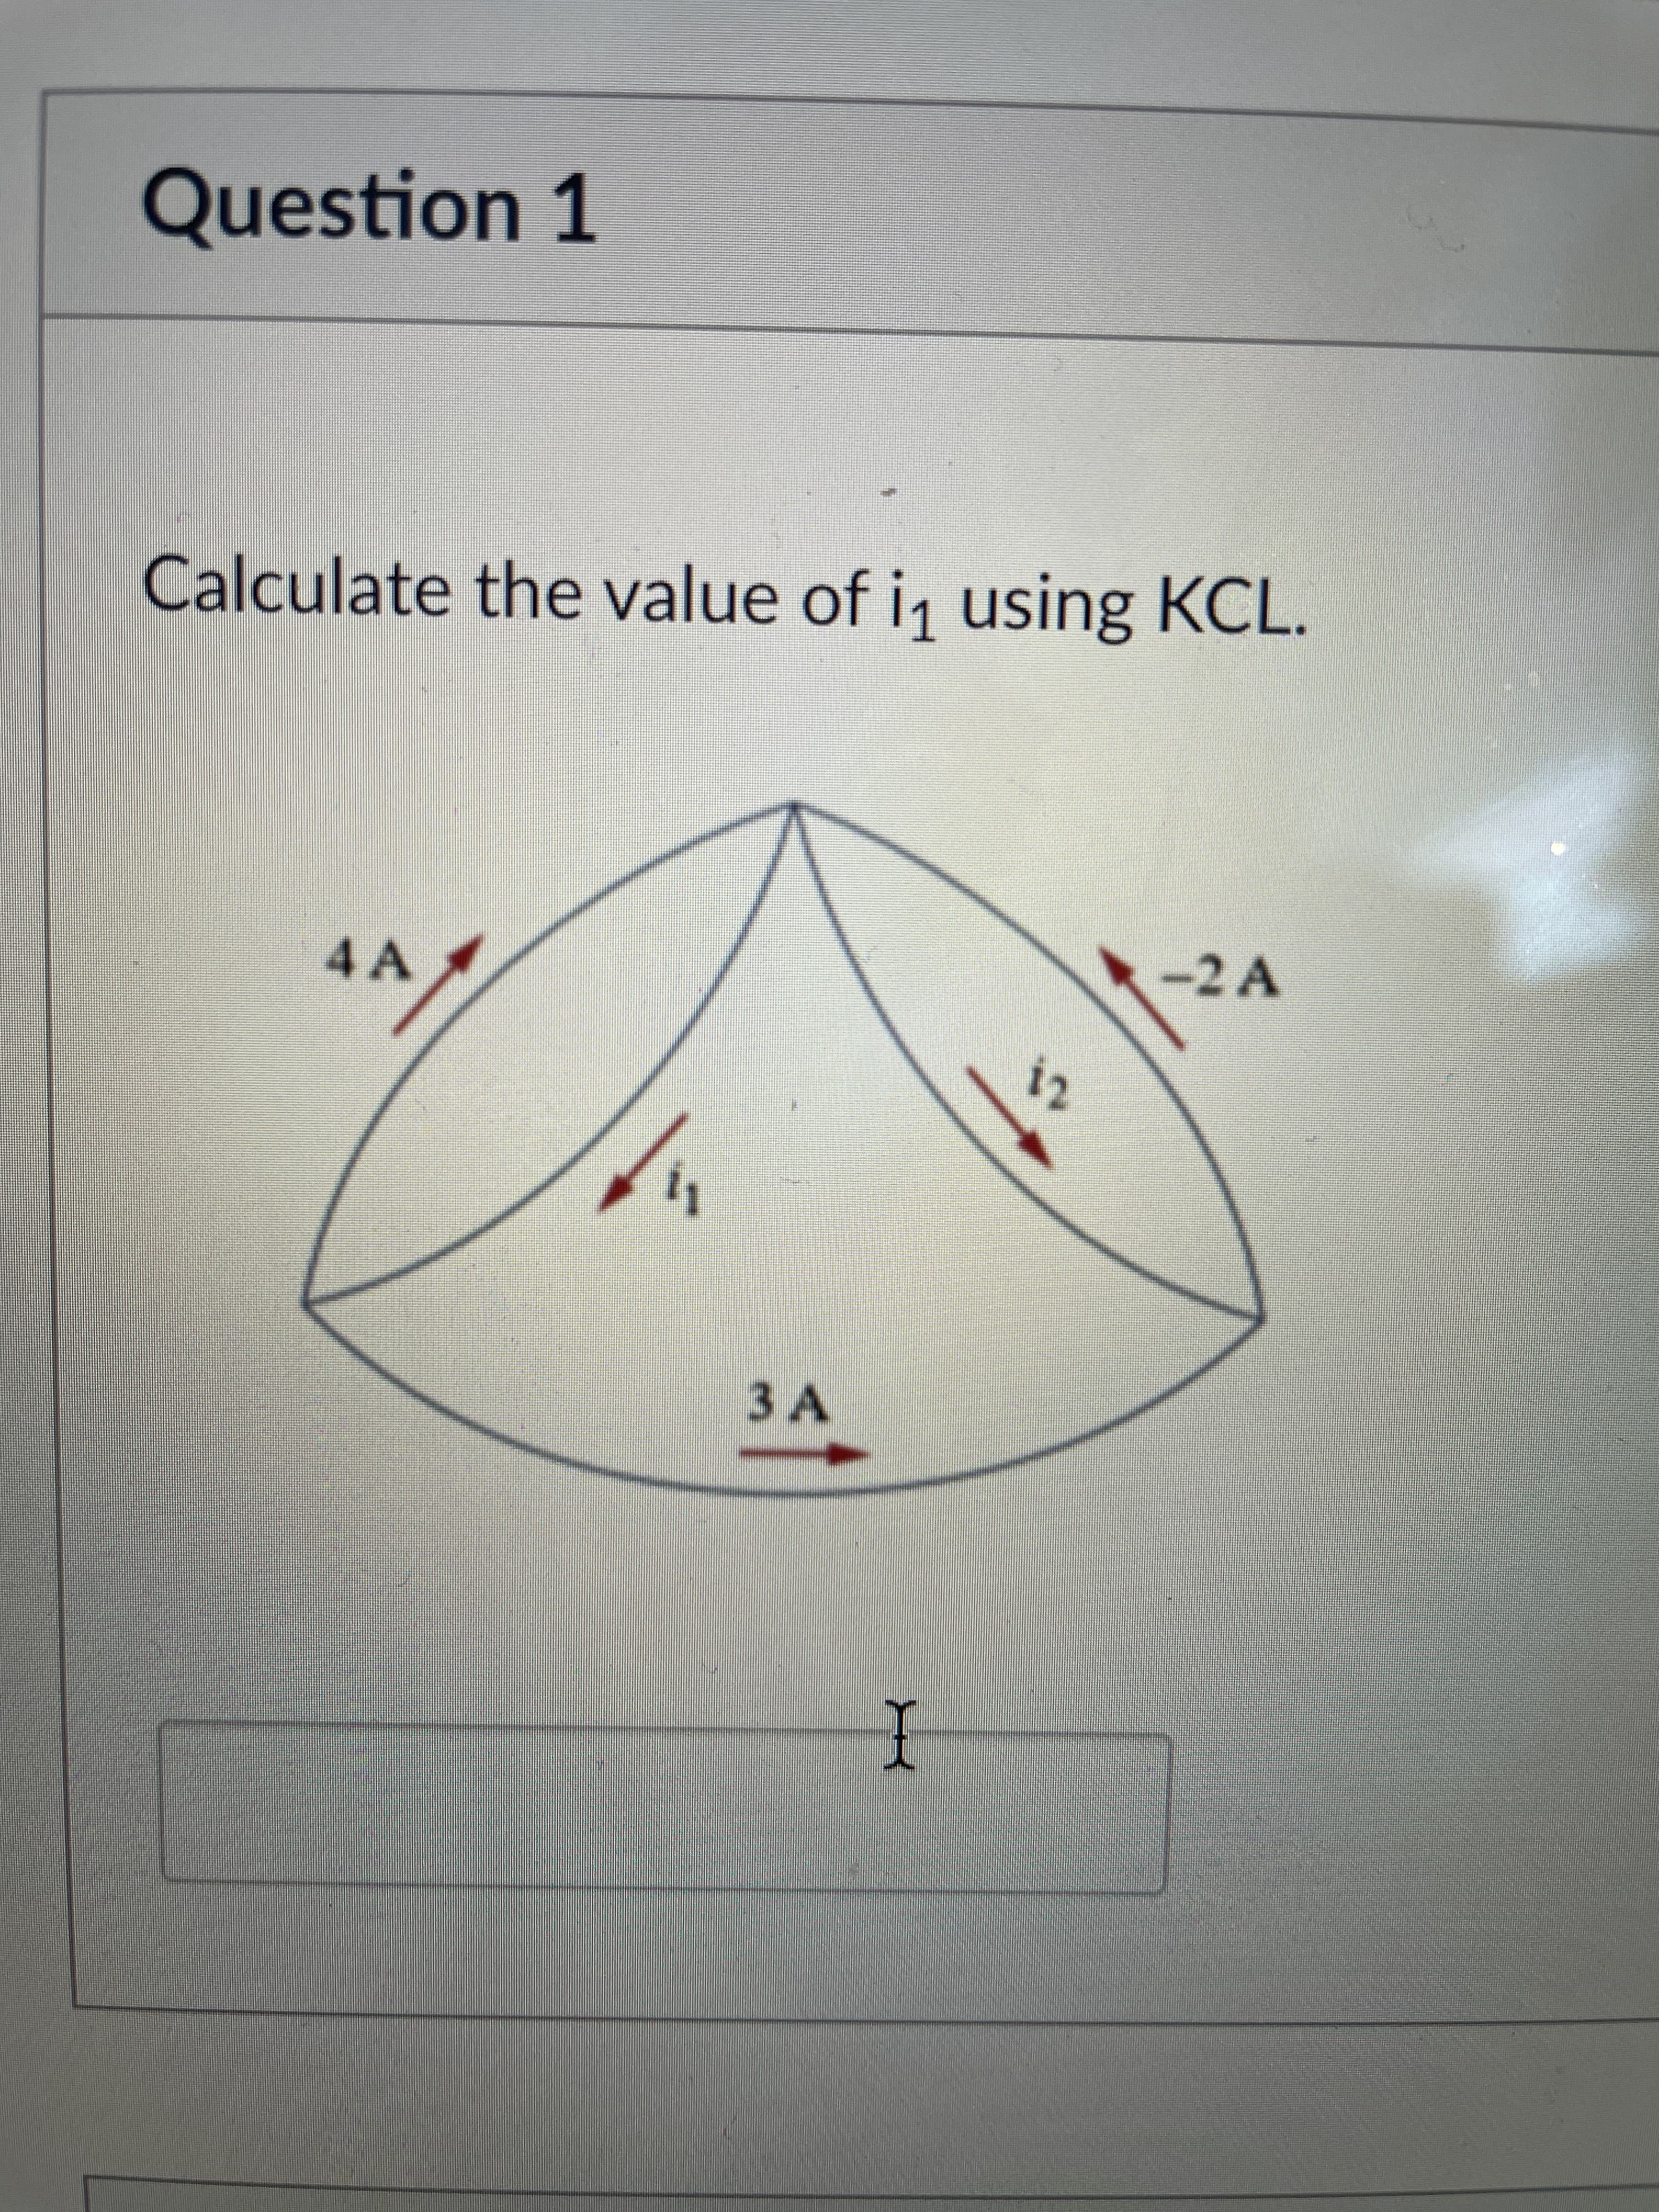 Question 1
Calculate the value of i, using KCL.
4 A
-2A
3A
